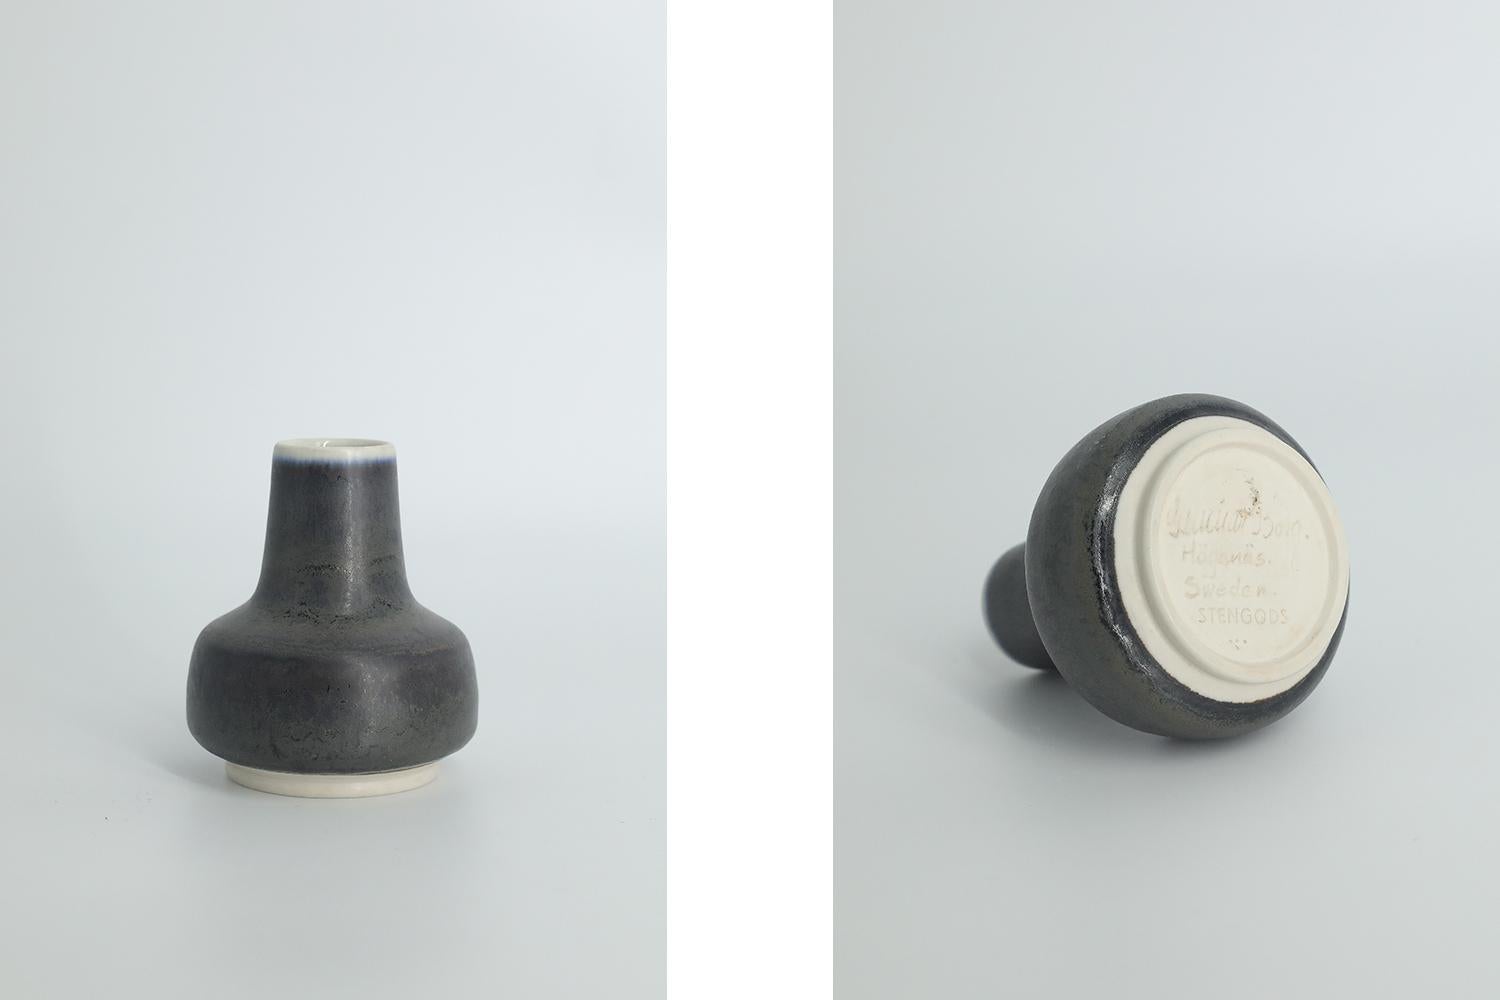 This miniature, collectible stoneware vase was designed by Gunnar Borg for the Swedish manufacture Höganäs Keramik during the 1960s. Handmade by a Master, with the utmost care and attention to details. The anthracite colored vase in an irregular